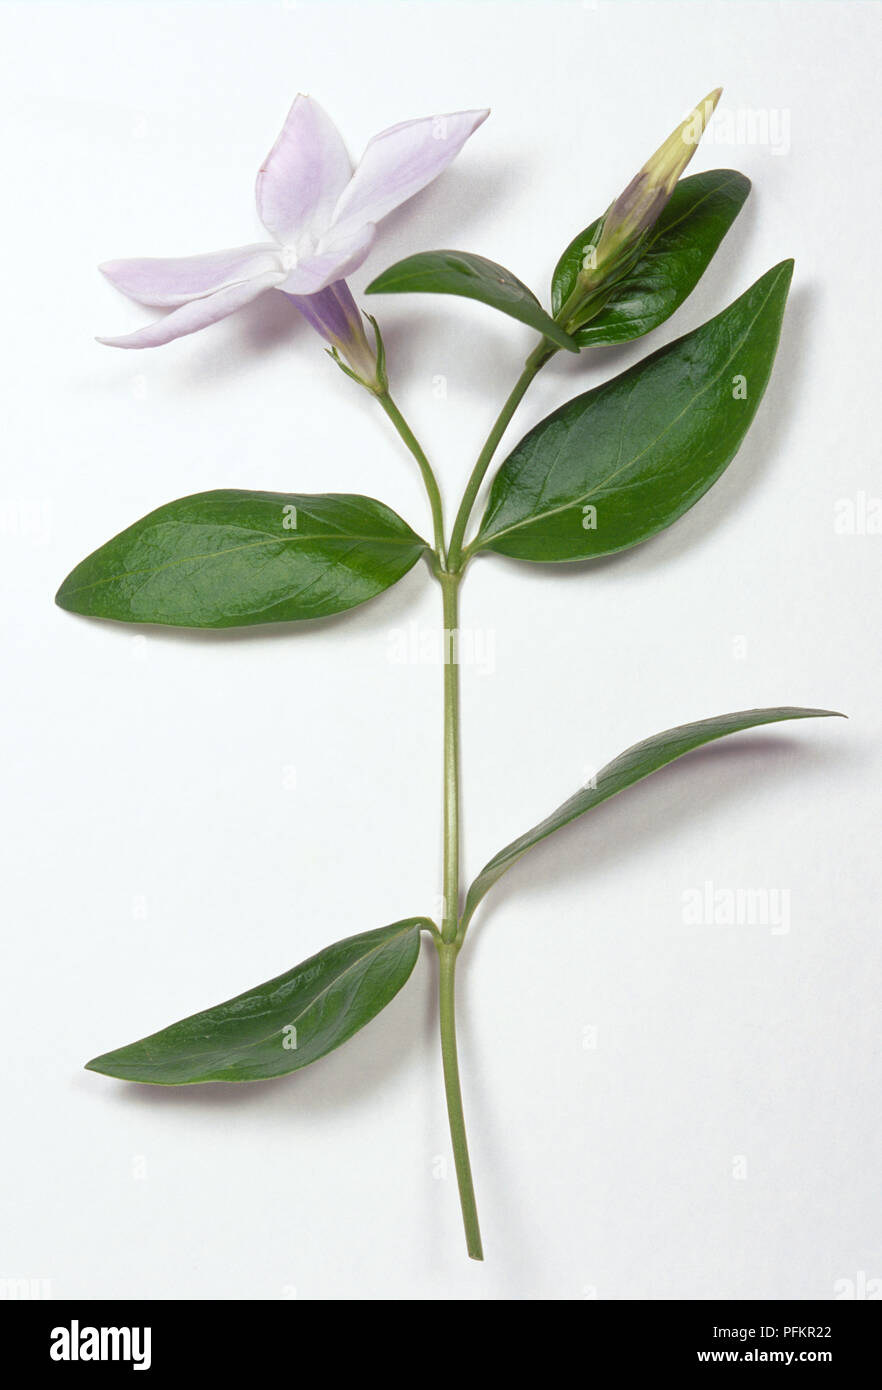 Vinca difformis, intermediate periwinkle stem with opposite green leaves and a open pale pink flower and closed flower. Stock Photo